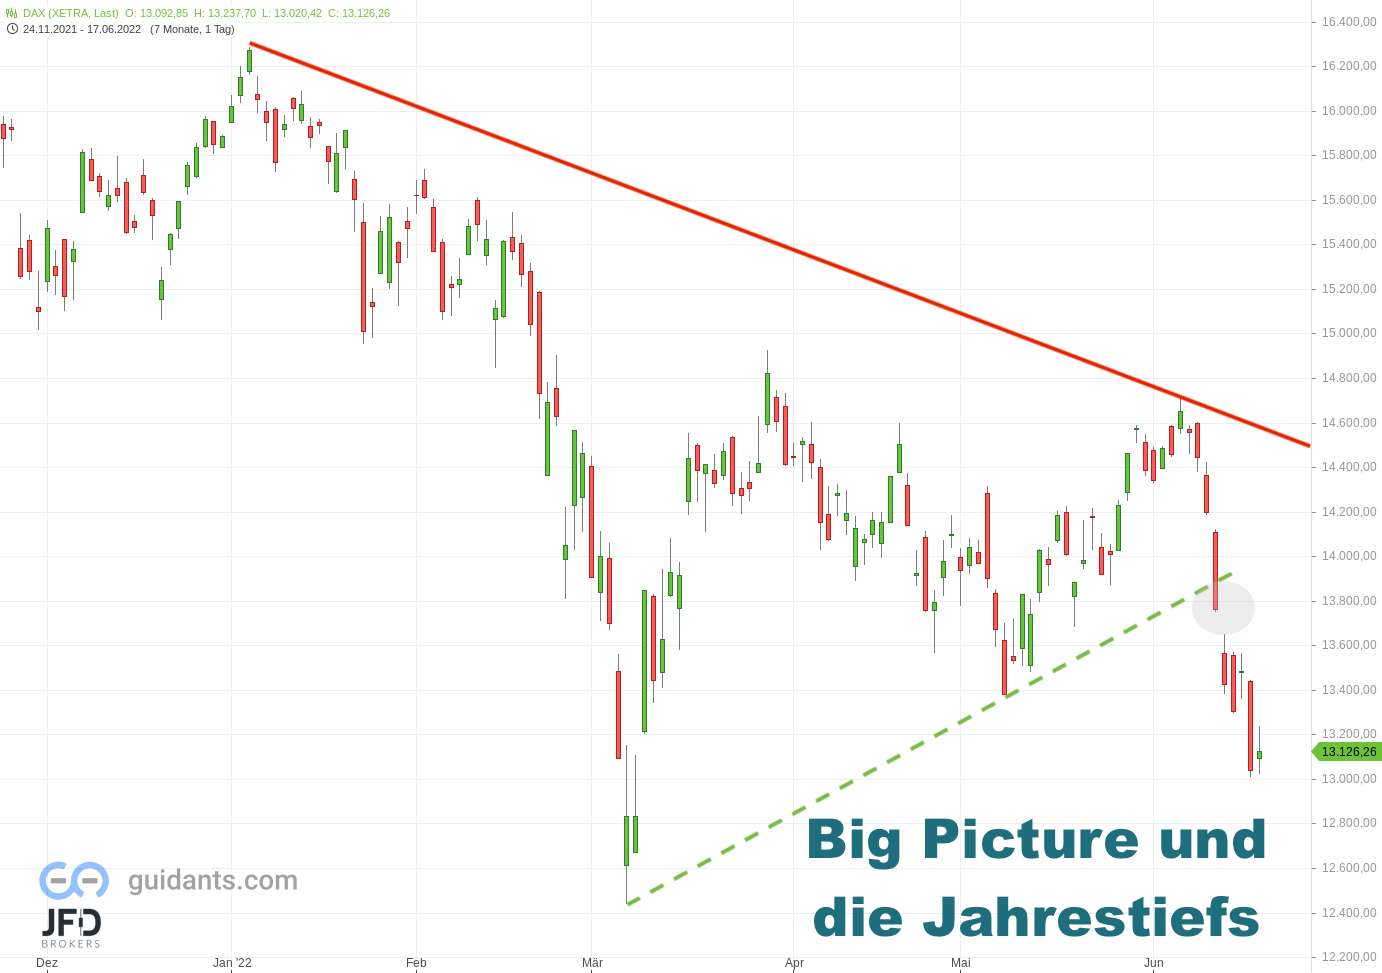 20220619 Xetra DAX Big Picture